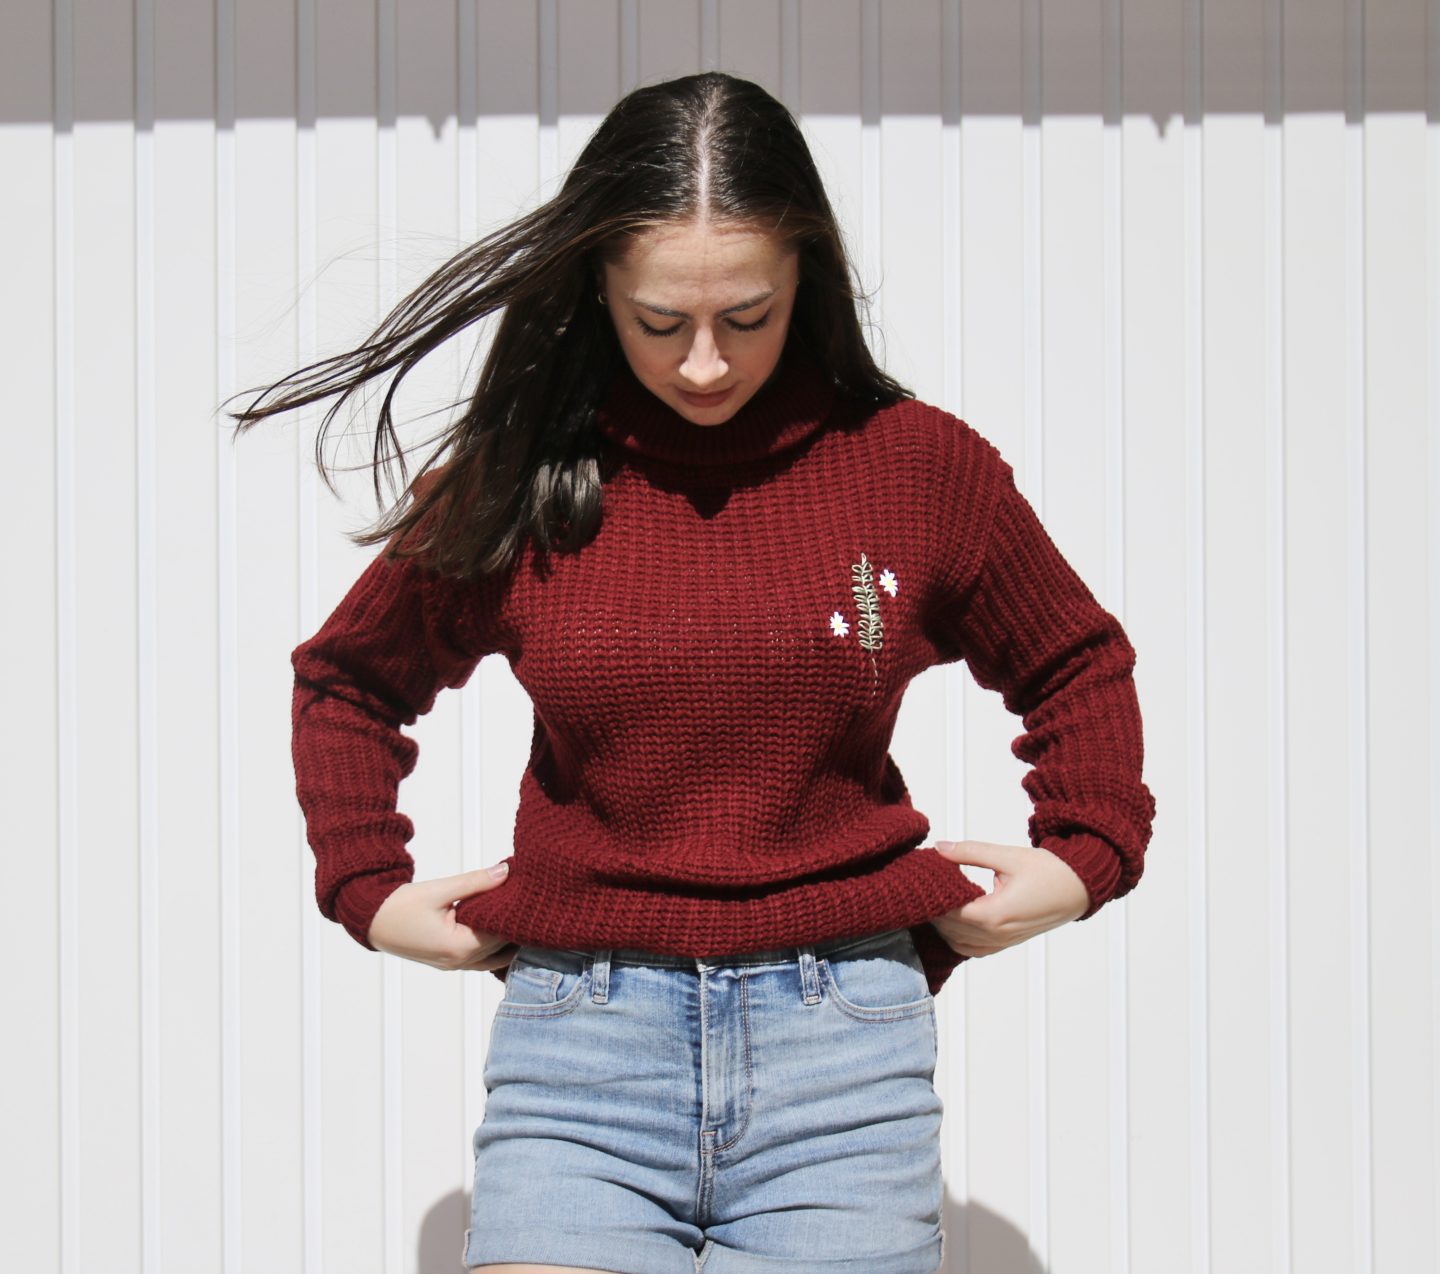 brunette girl wearing a red jumper hand embroidered with a rosemary sprig and daisies